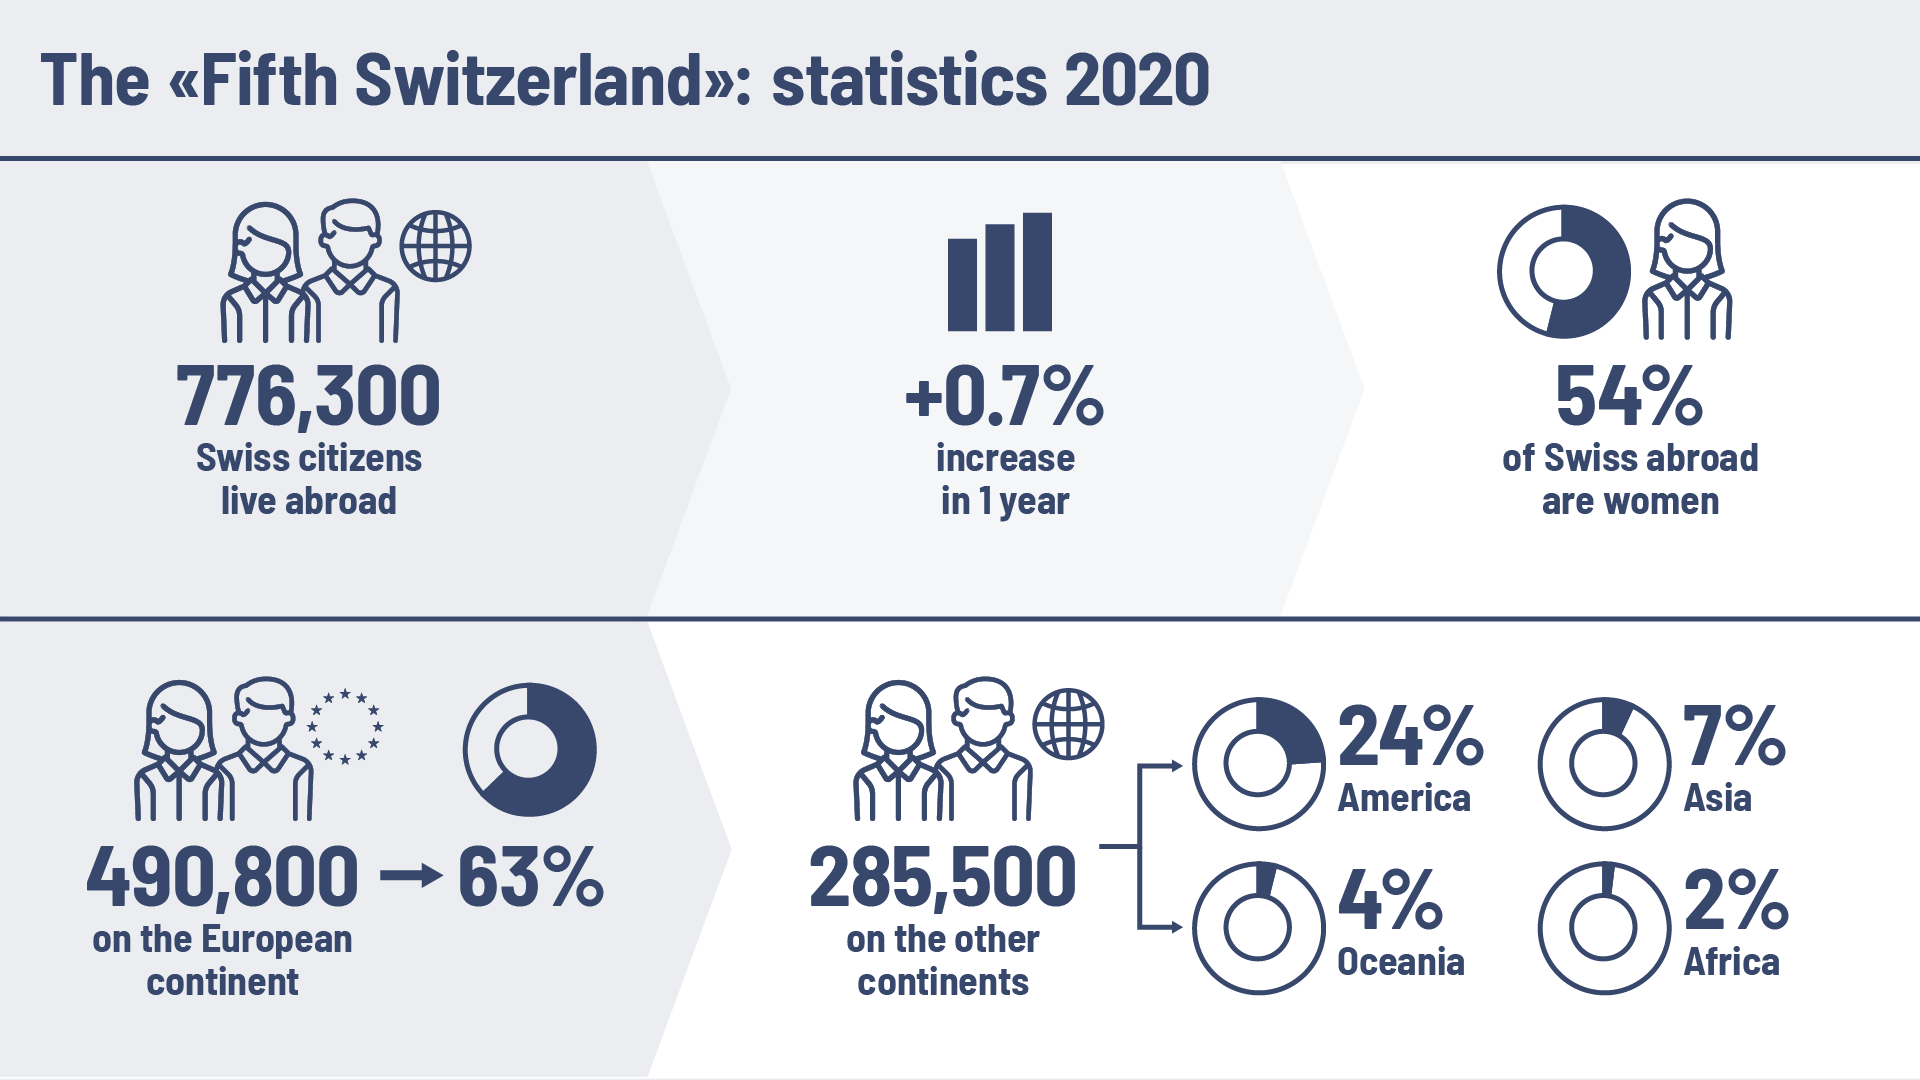 Six statistics show the development of Swiss citizens living abroad in 2020.